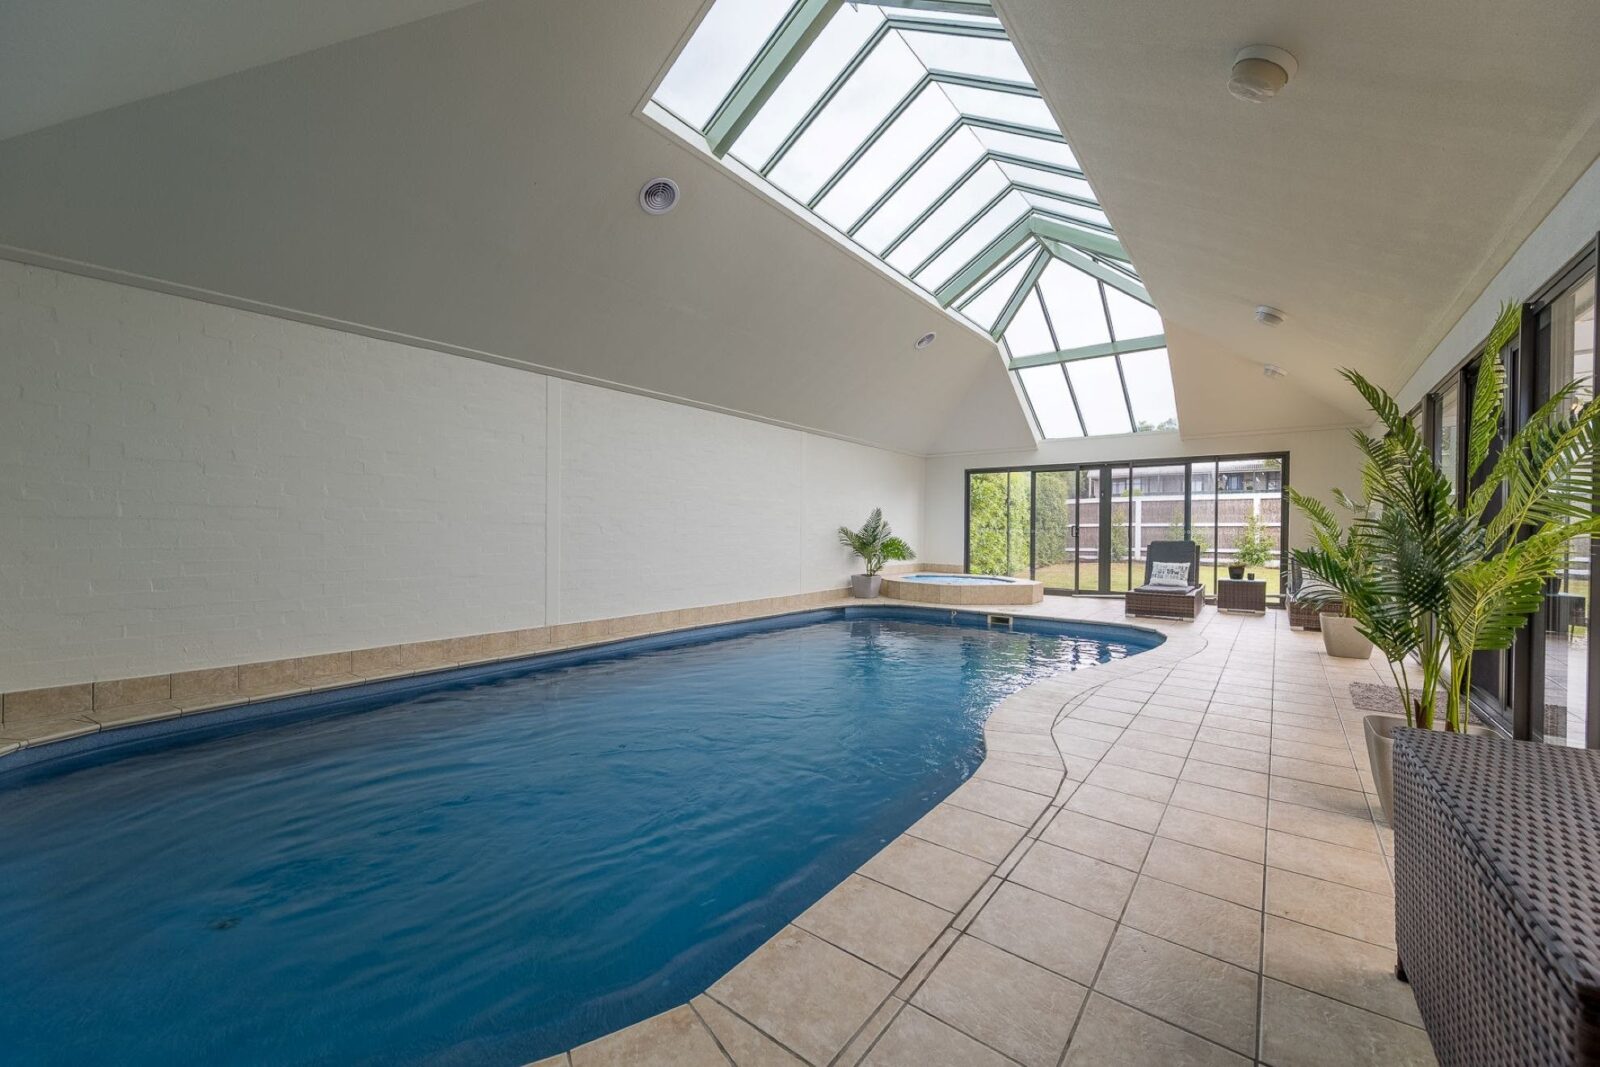 Image of indoor heated swimming pool with skylights above and windows at end of pool. Tiled surround